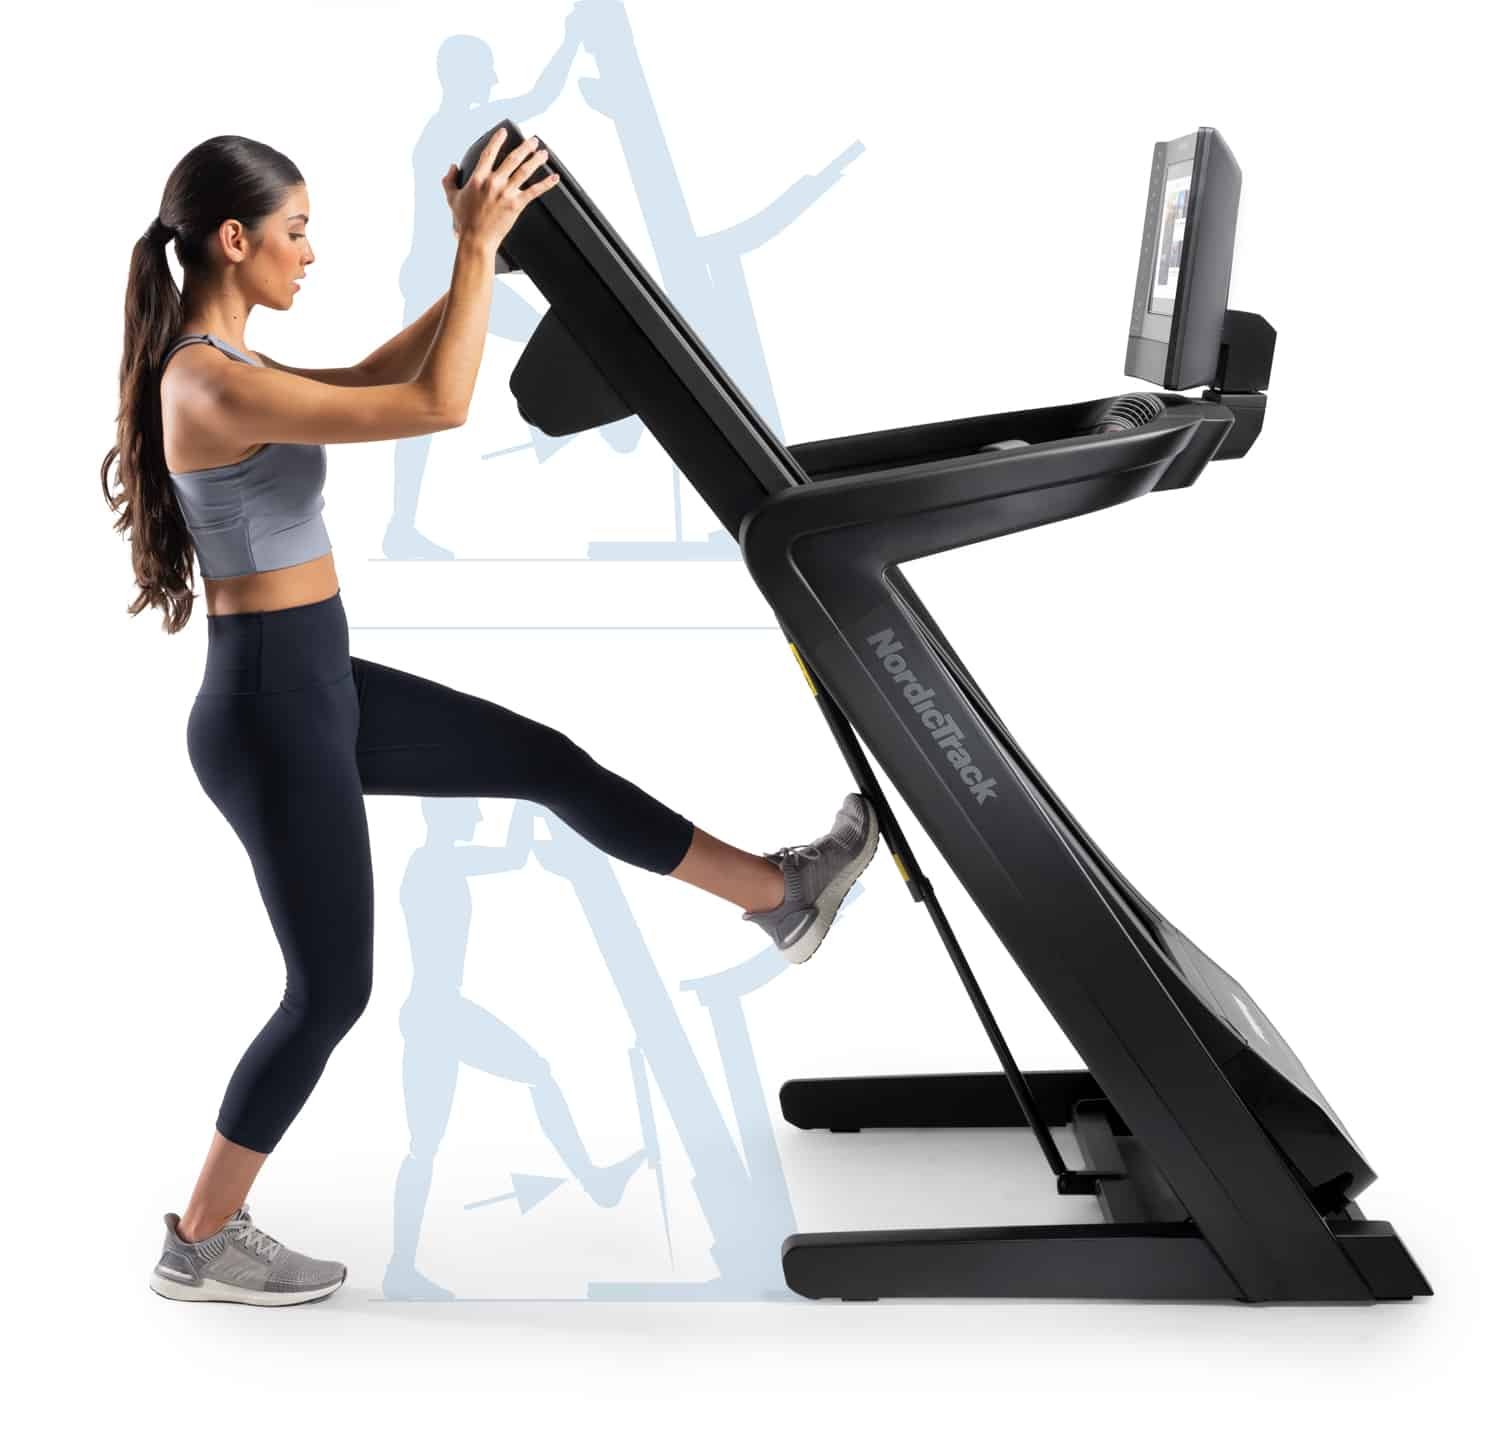 NordicTrack Commercial 2450 Treadmill Review